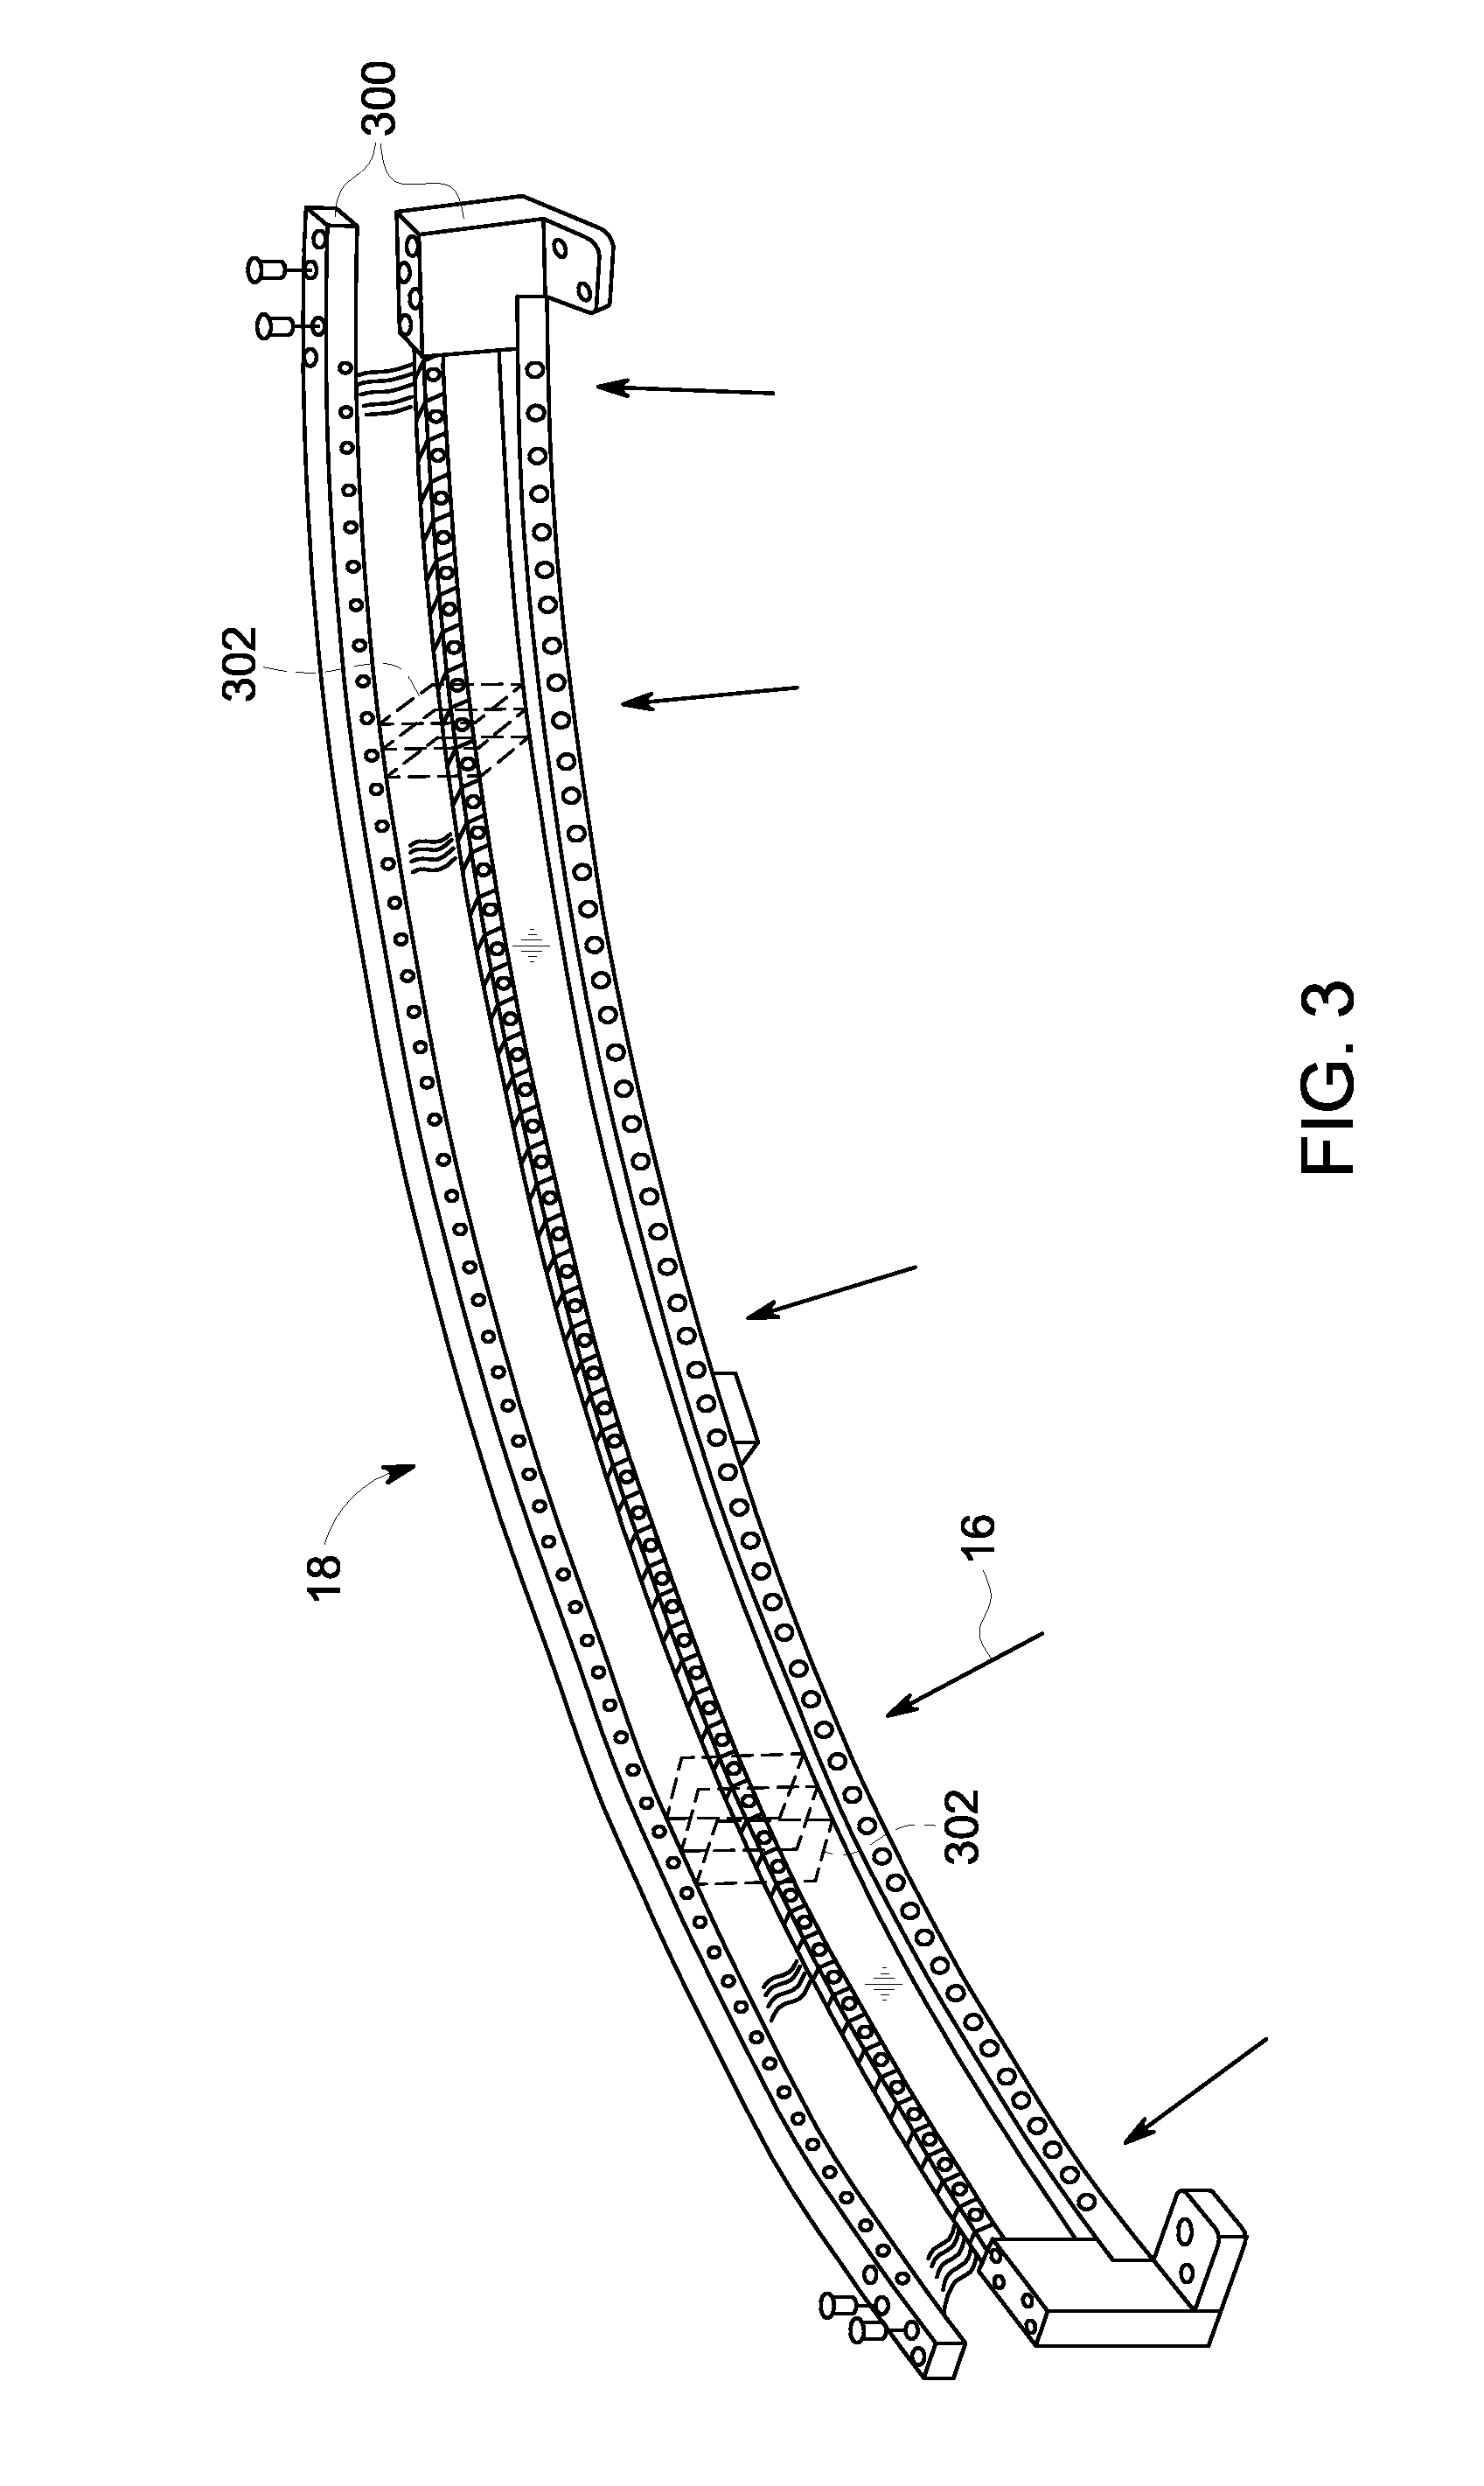 System and method of computed tomography signal restoration via noise reduction